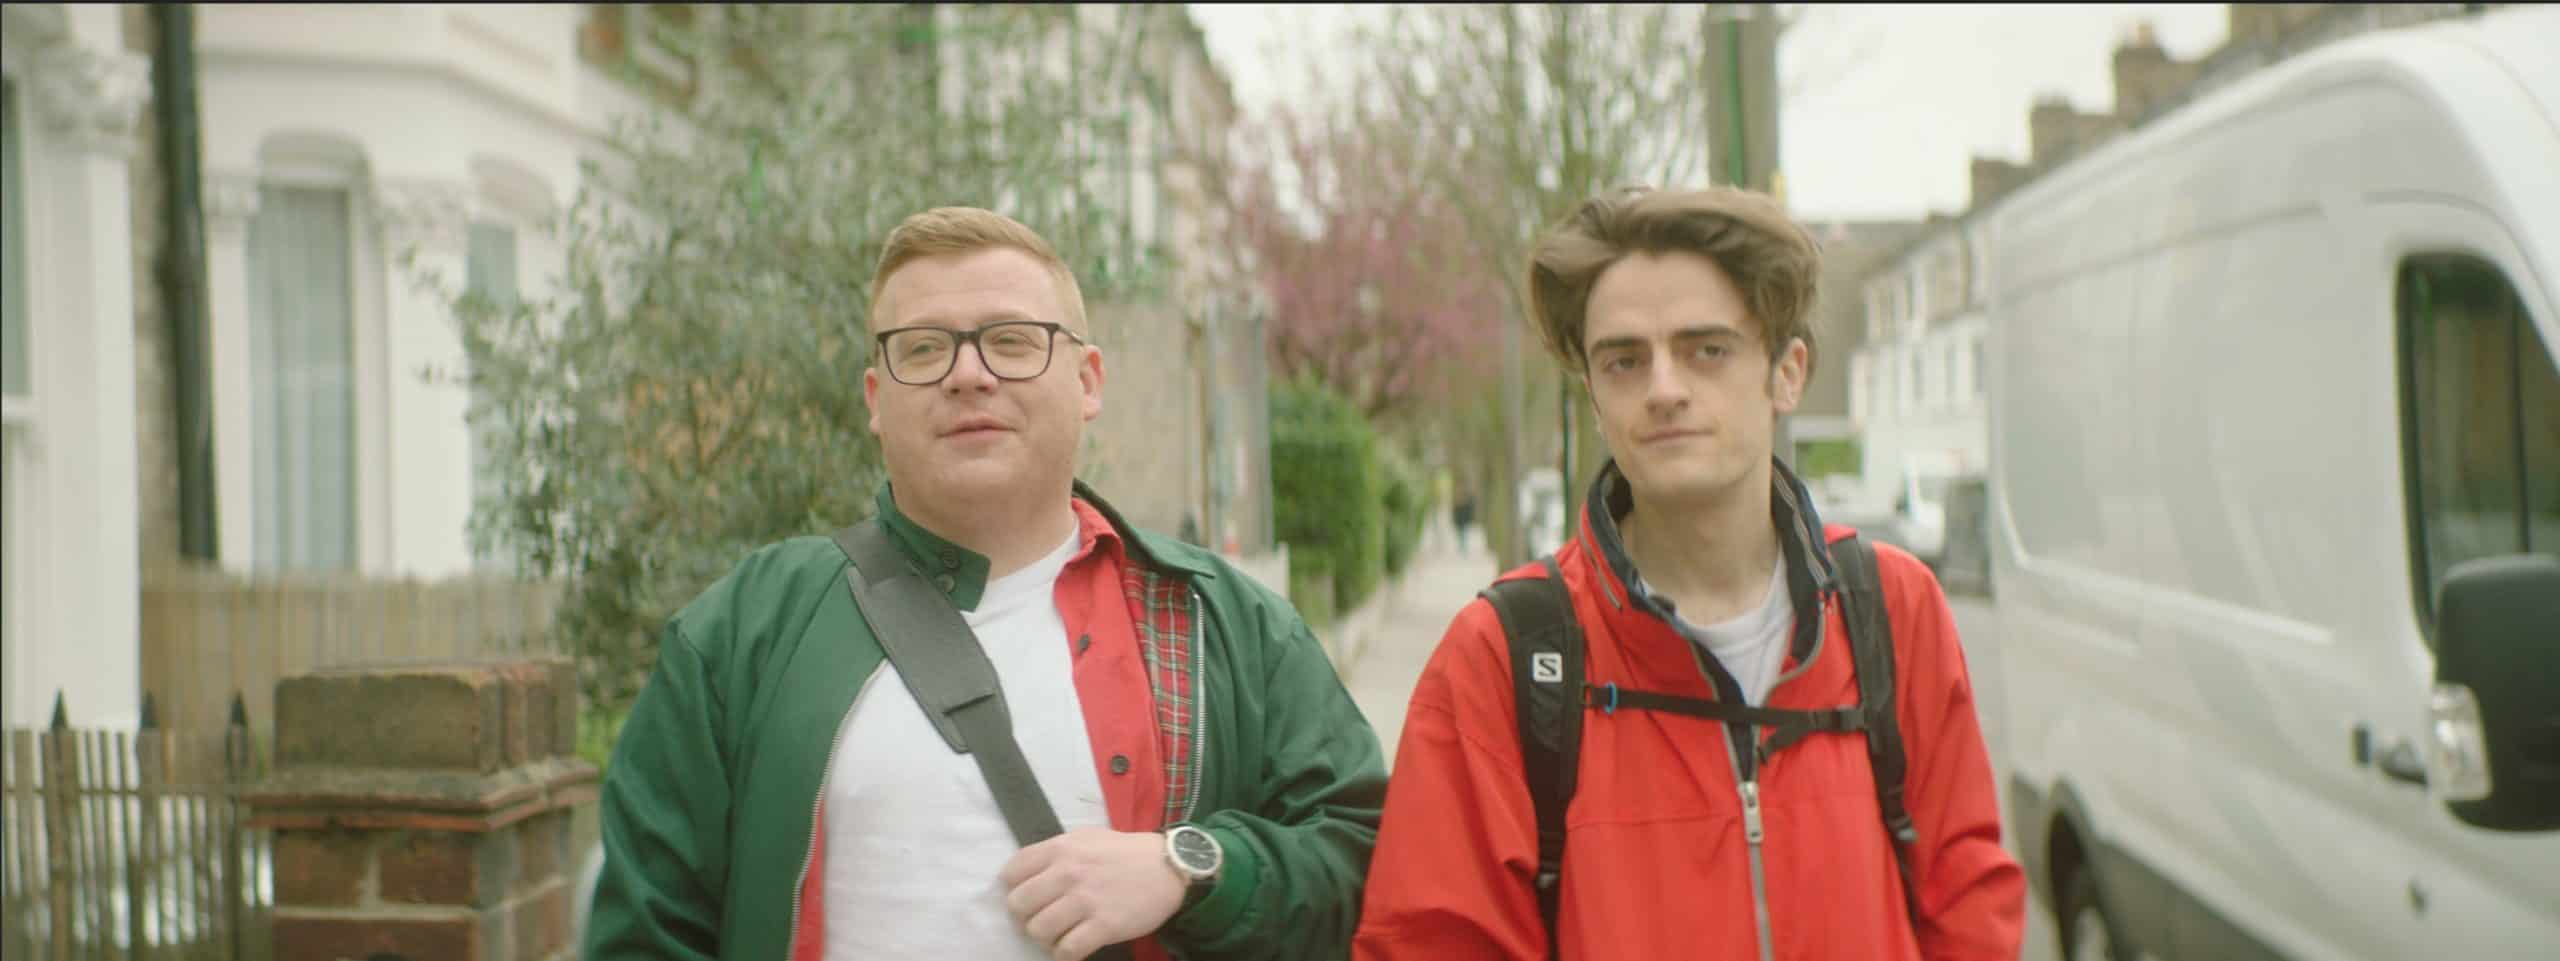 Get Ready to Laugh Out Loud with British Comedy 'JACK' - A Film About a Man and His Penis 20